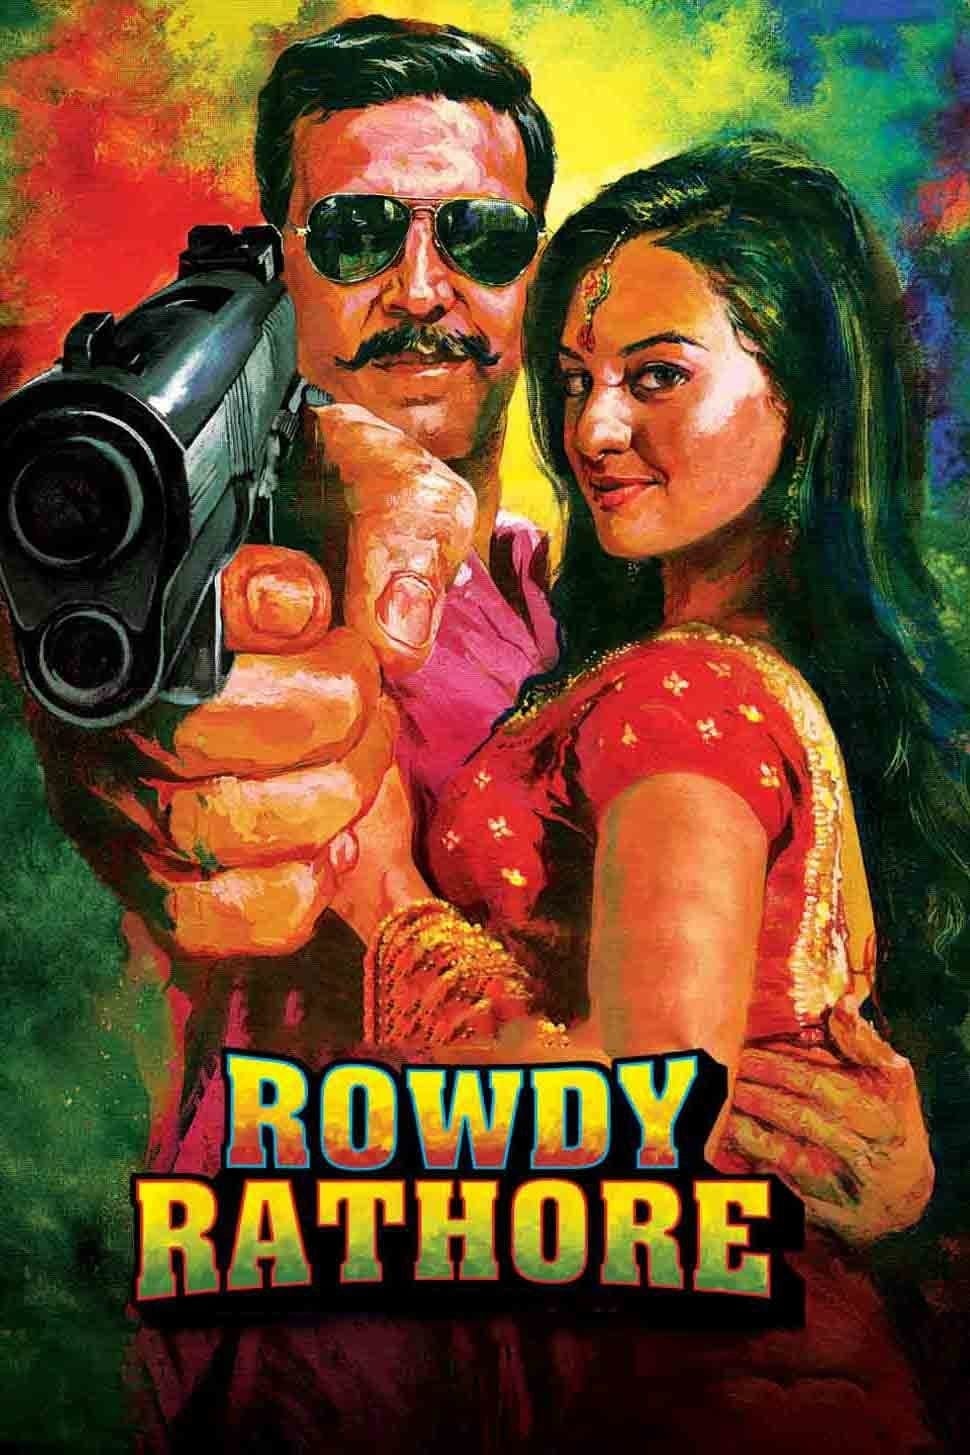 Poster for the movie "Rowdy Rathore"